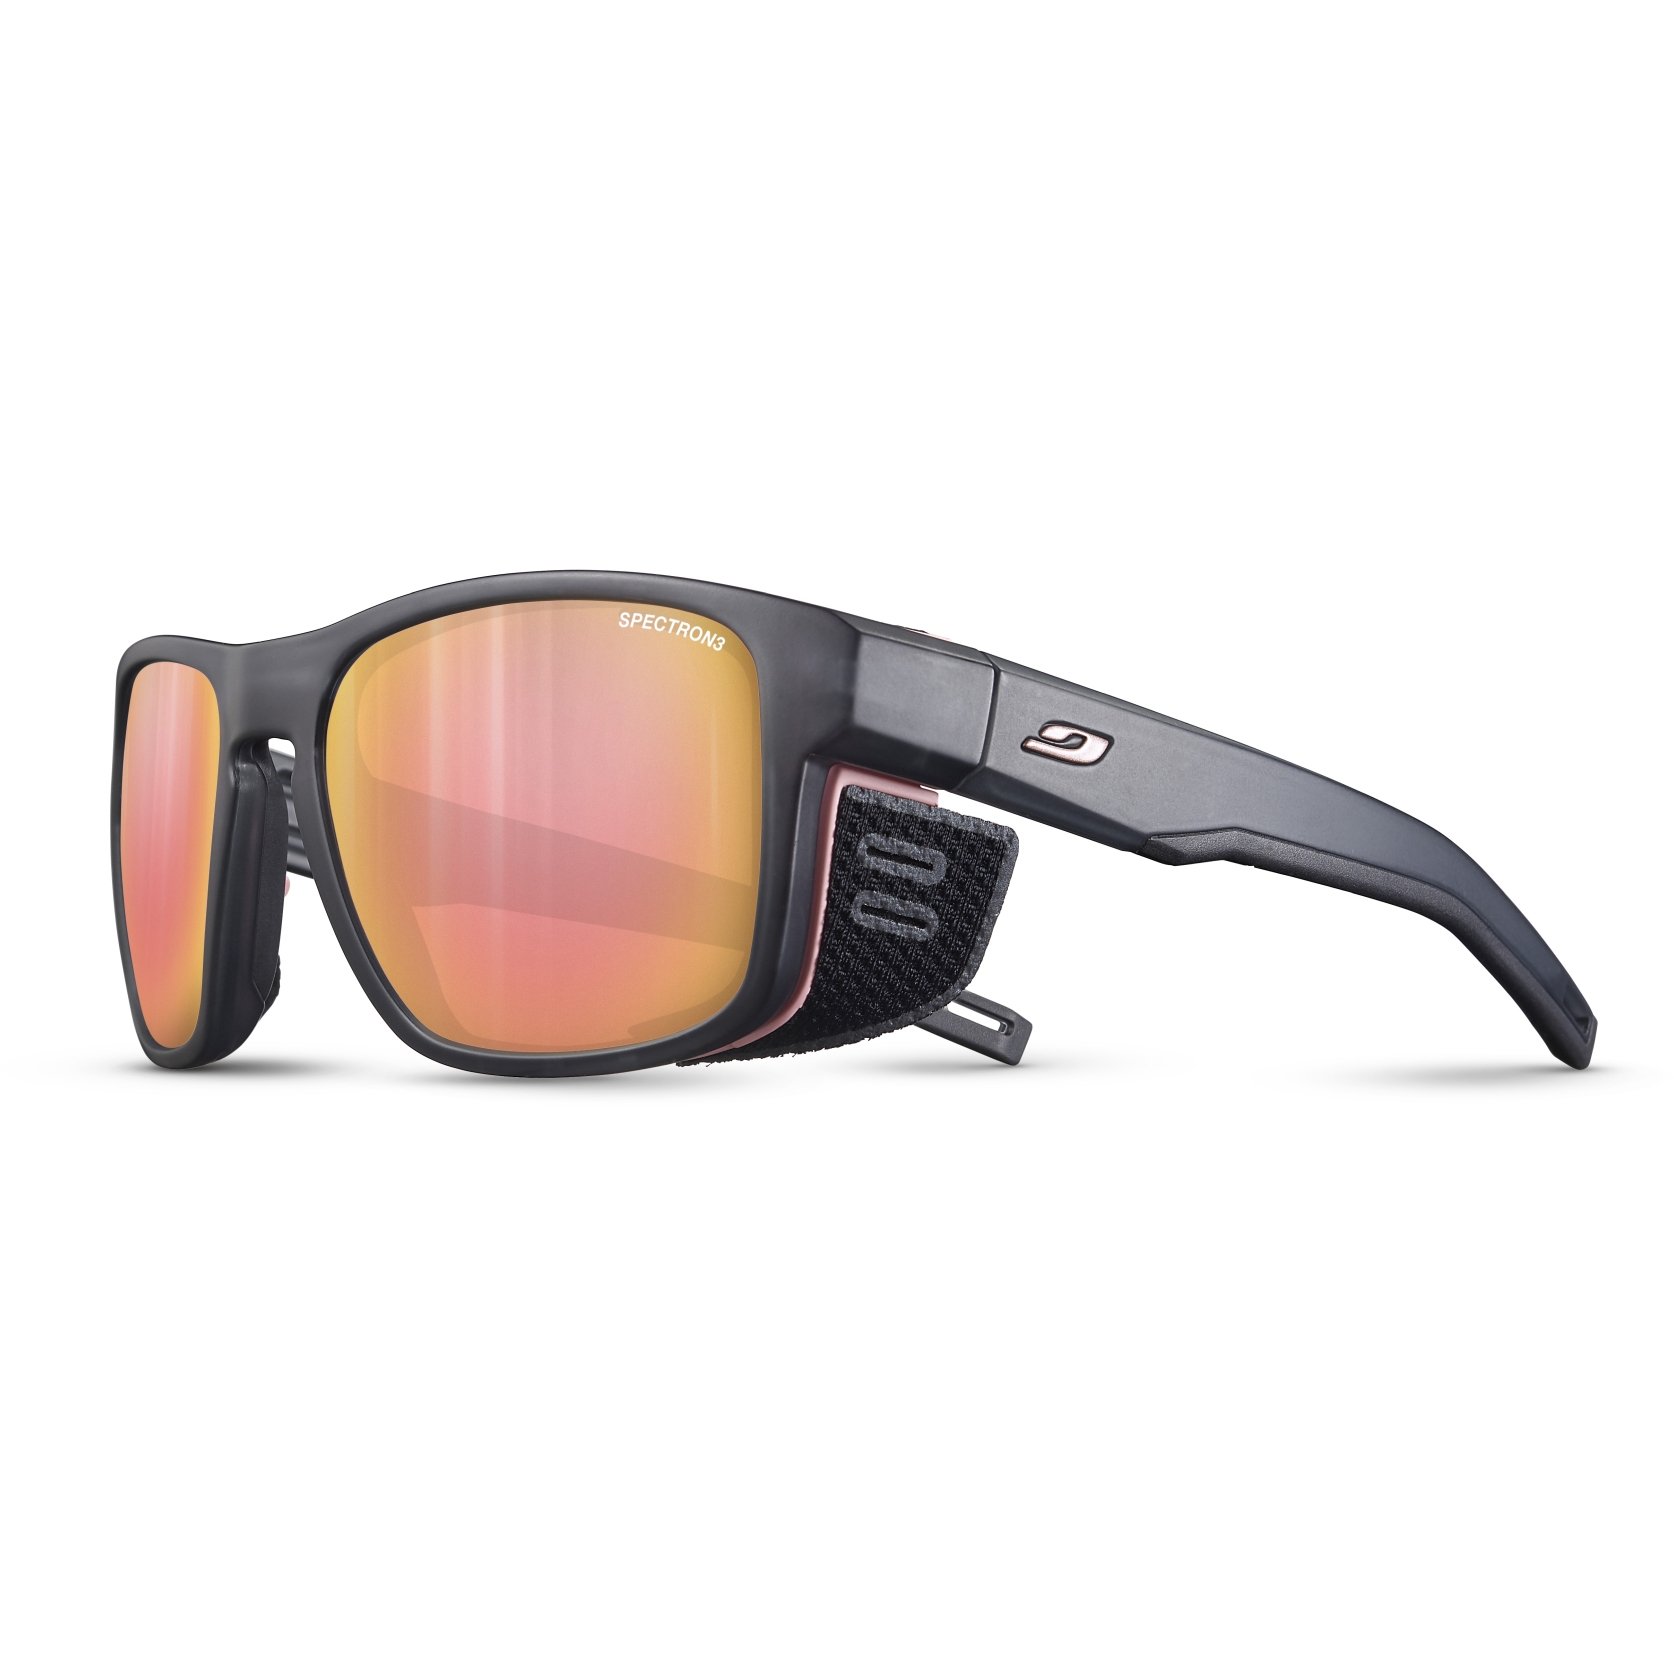 Picture of Julbo Shield M Sunglasses - Grey/Pink / Pink Gold Spectron 3